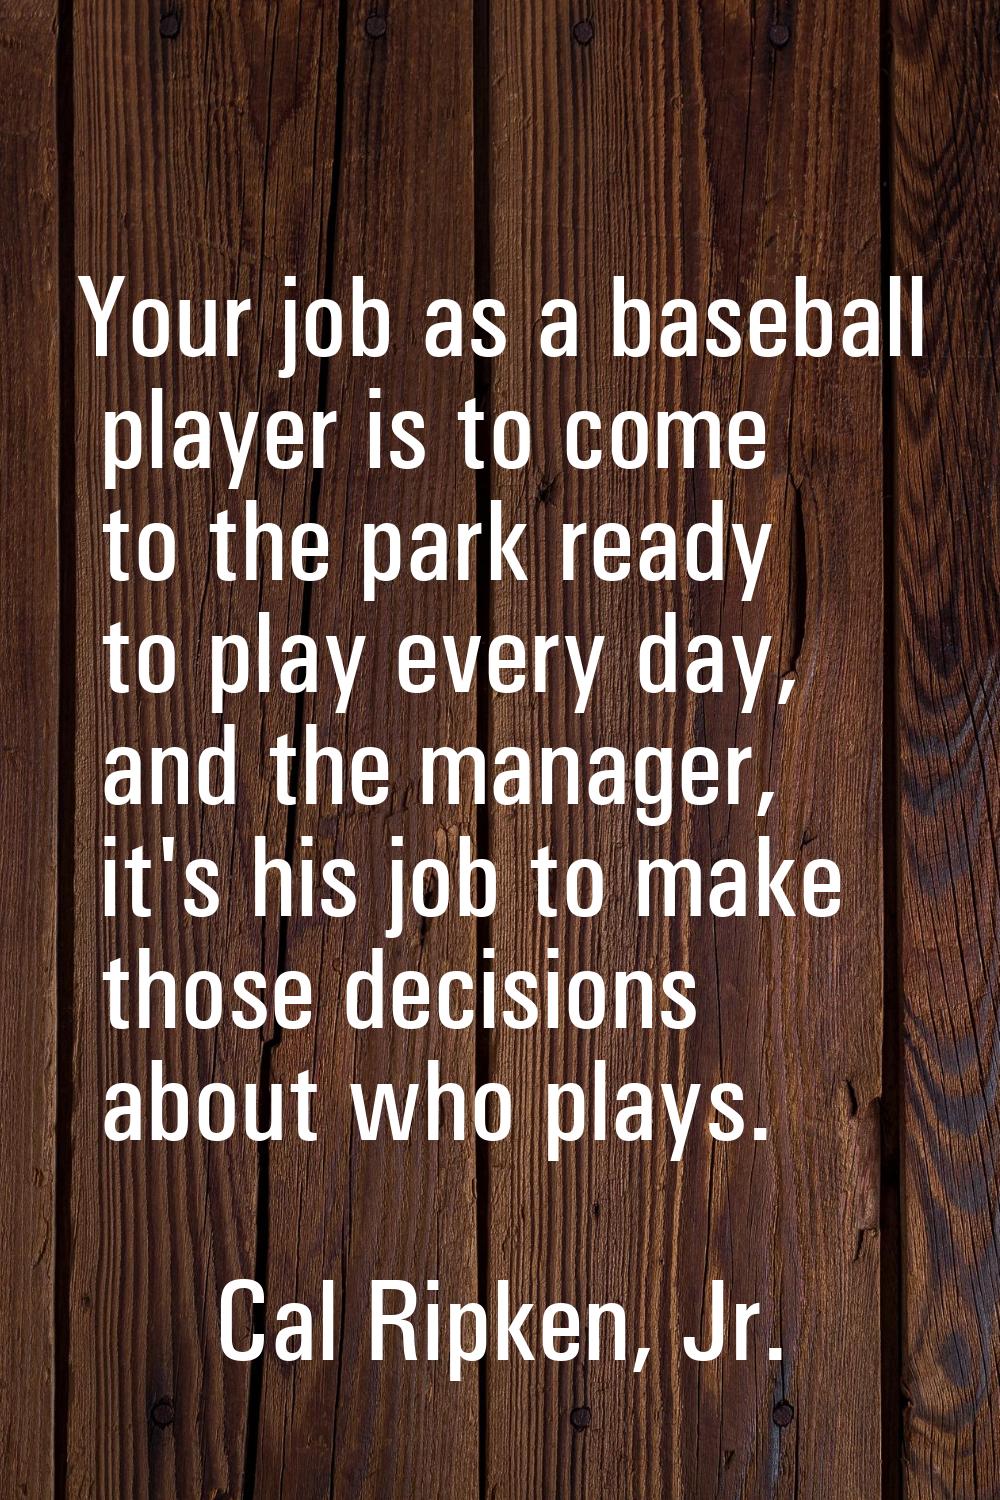 Your job as a baseball player is to come to the park ready to play every day, and the manager, it's